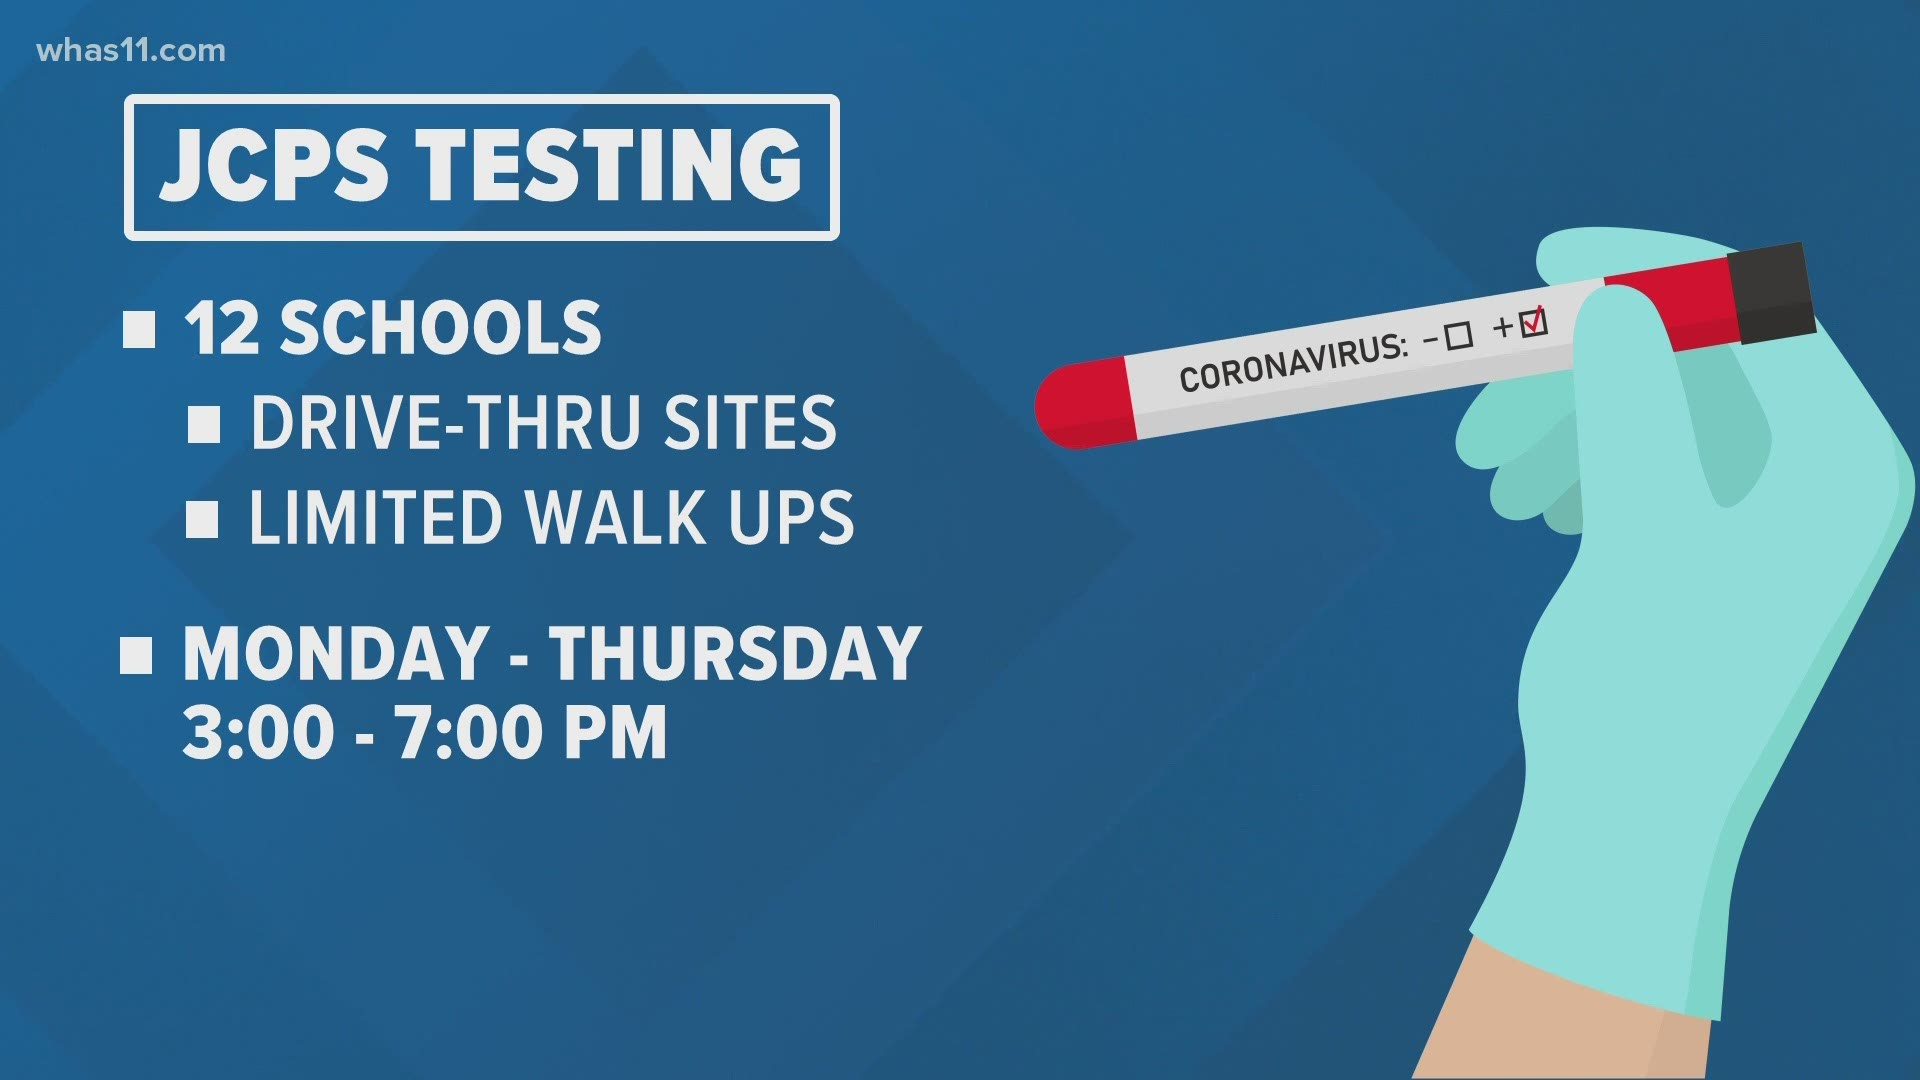 The school system will be providing rapid tests at select school sites for those within the JCPS family beginning March 15.